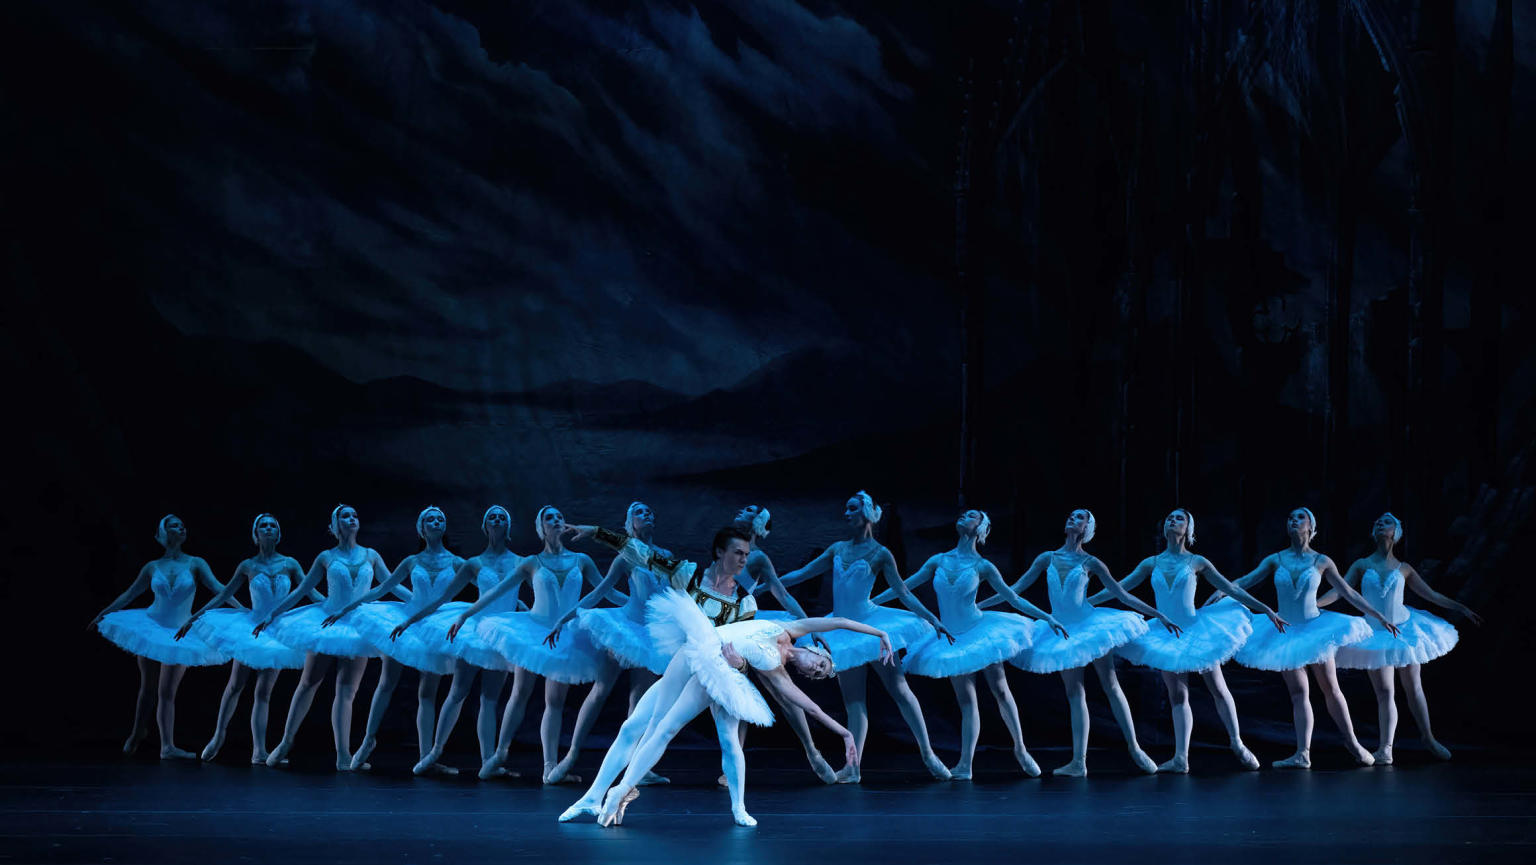 An image showcasing a dynamic composition: in the background, a group of ballerinas dances gracefully in a line, while in the foreground, a male danseur and a female ballerina captivate the viewer with their duet.